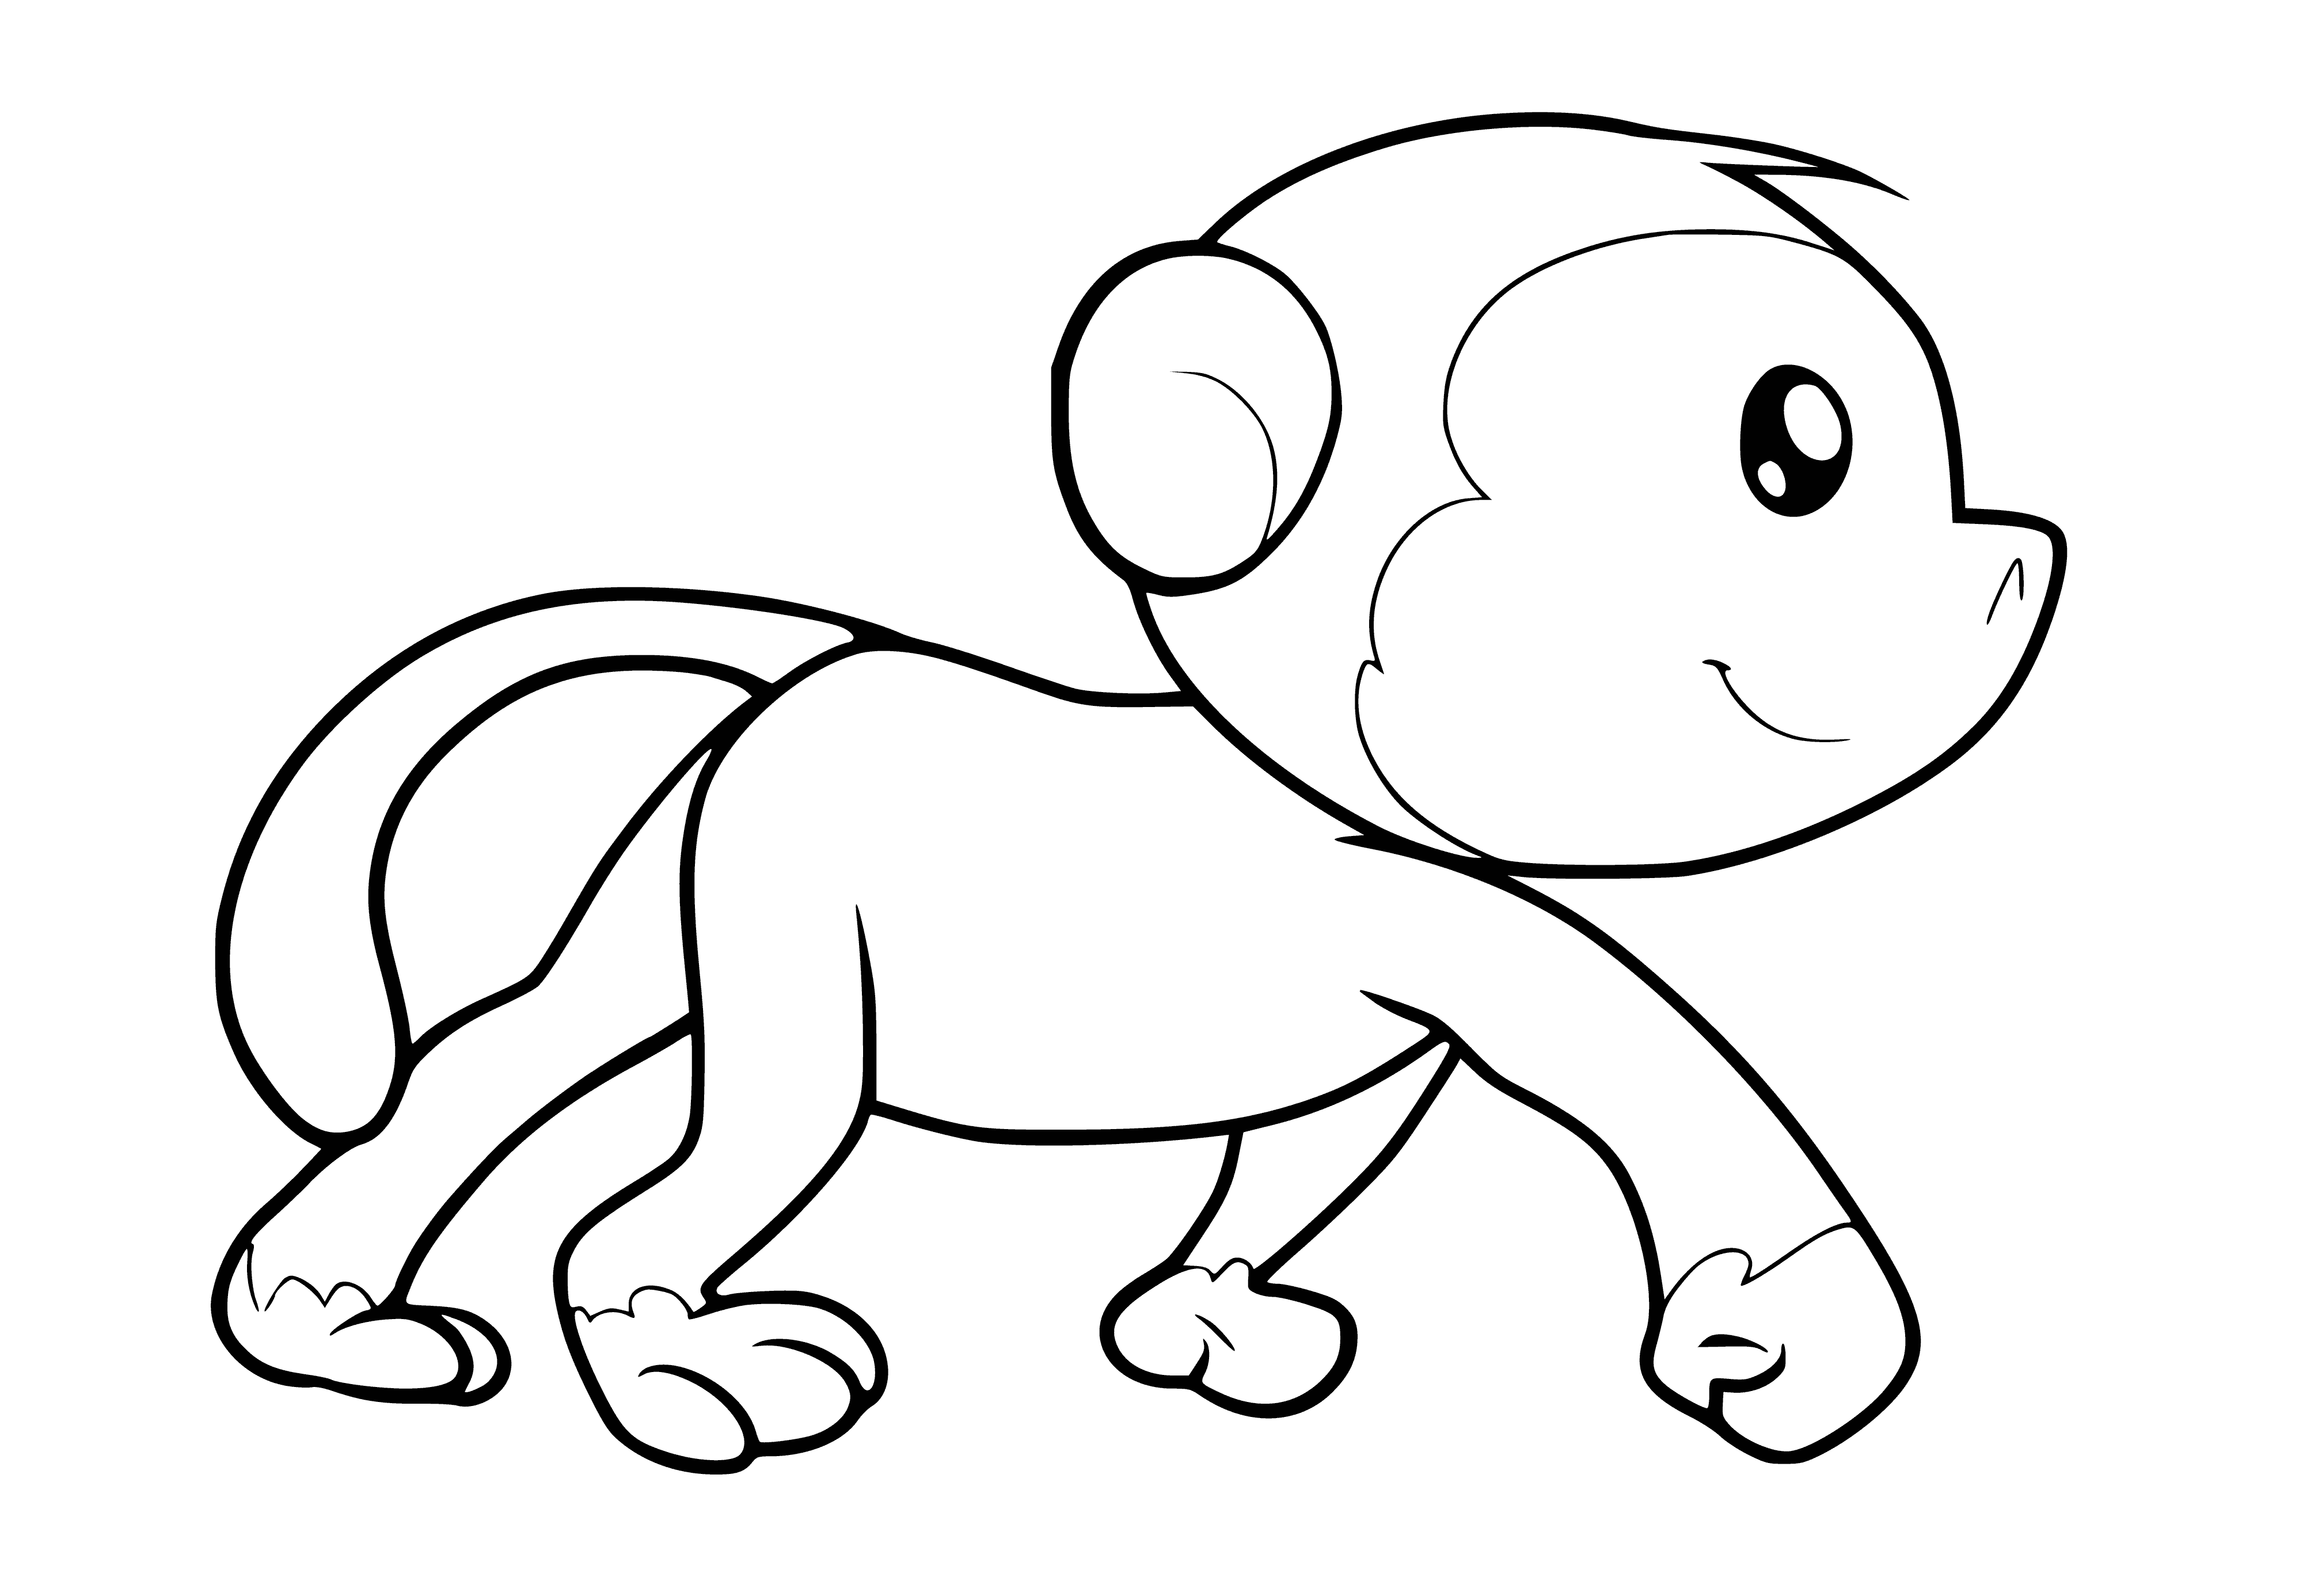 coloring page: Monkey hungrily eats banana while dangling one-handed from tree branch - long tail hanging below. Gazing off to the side.